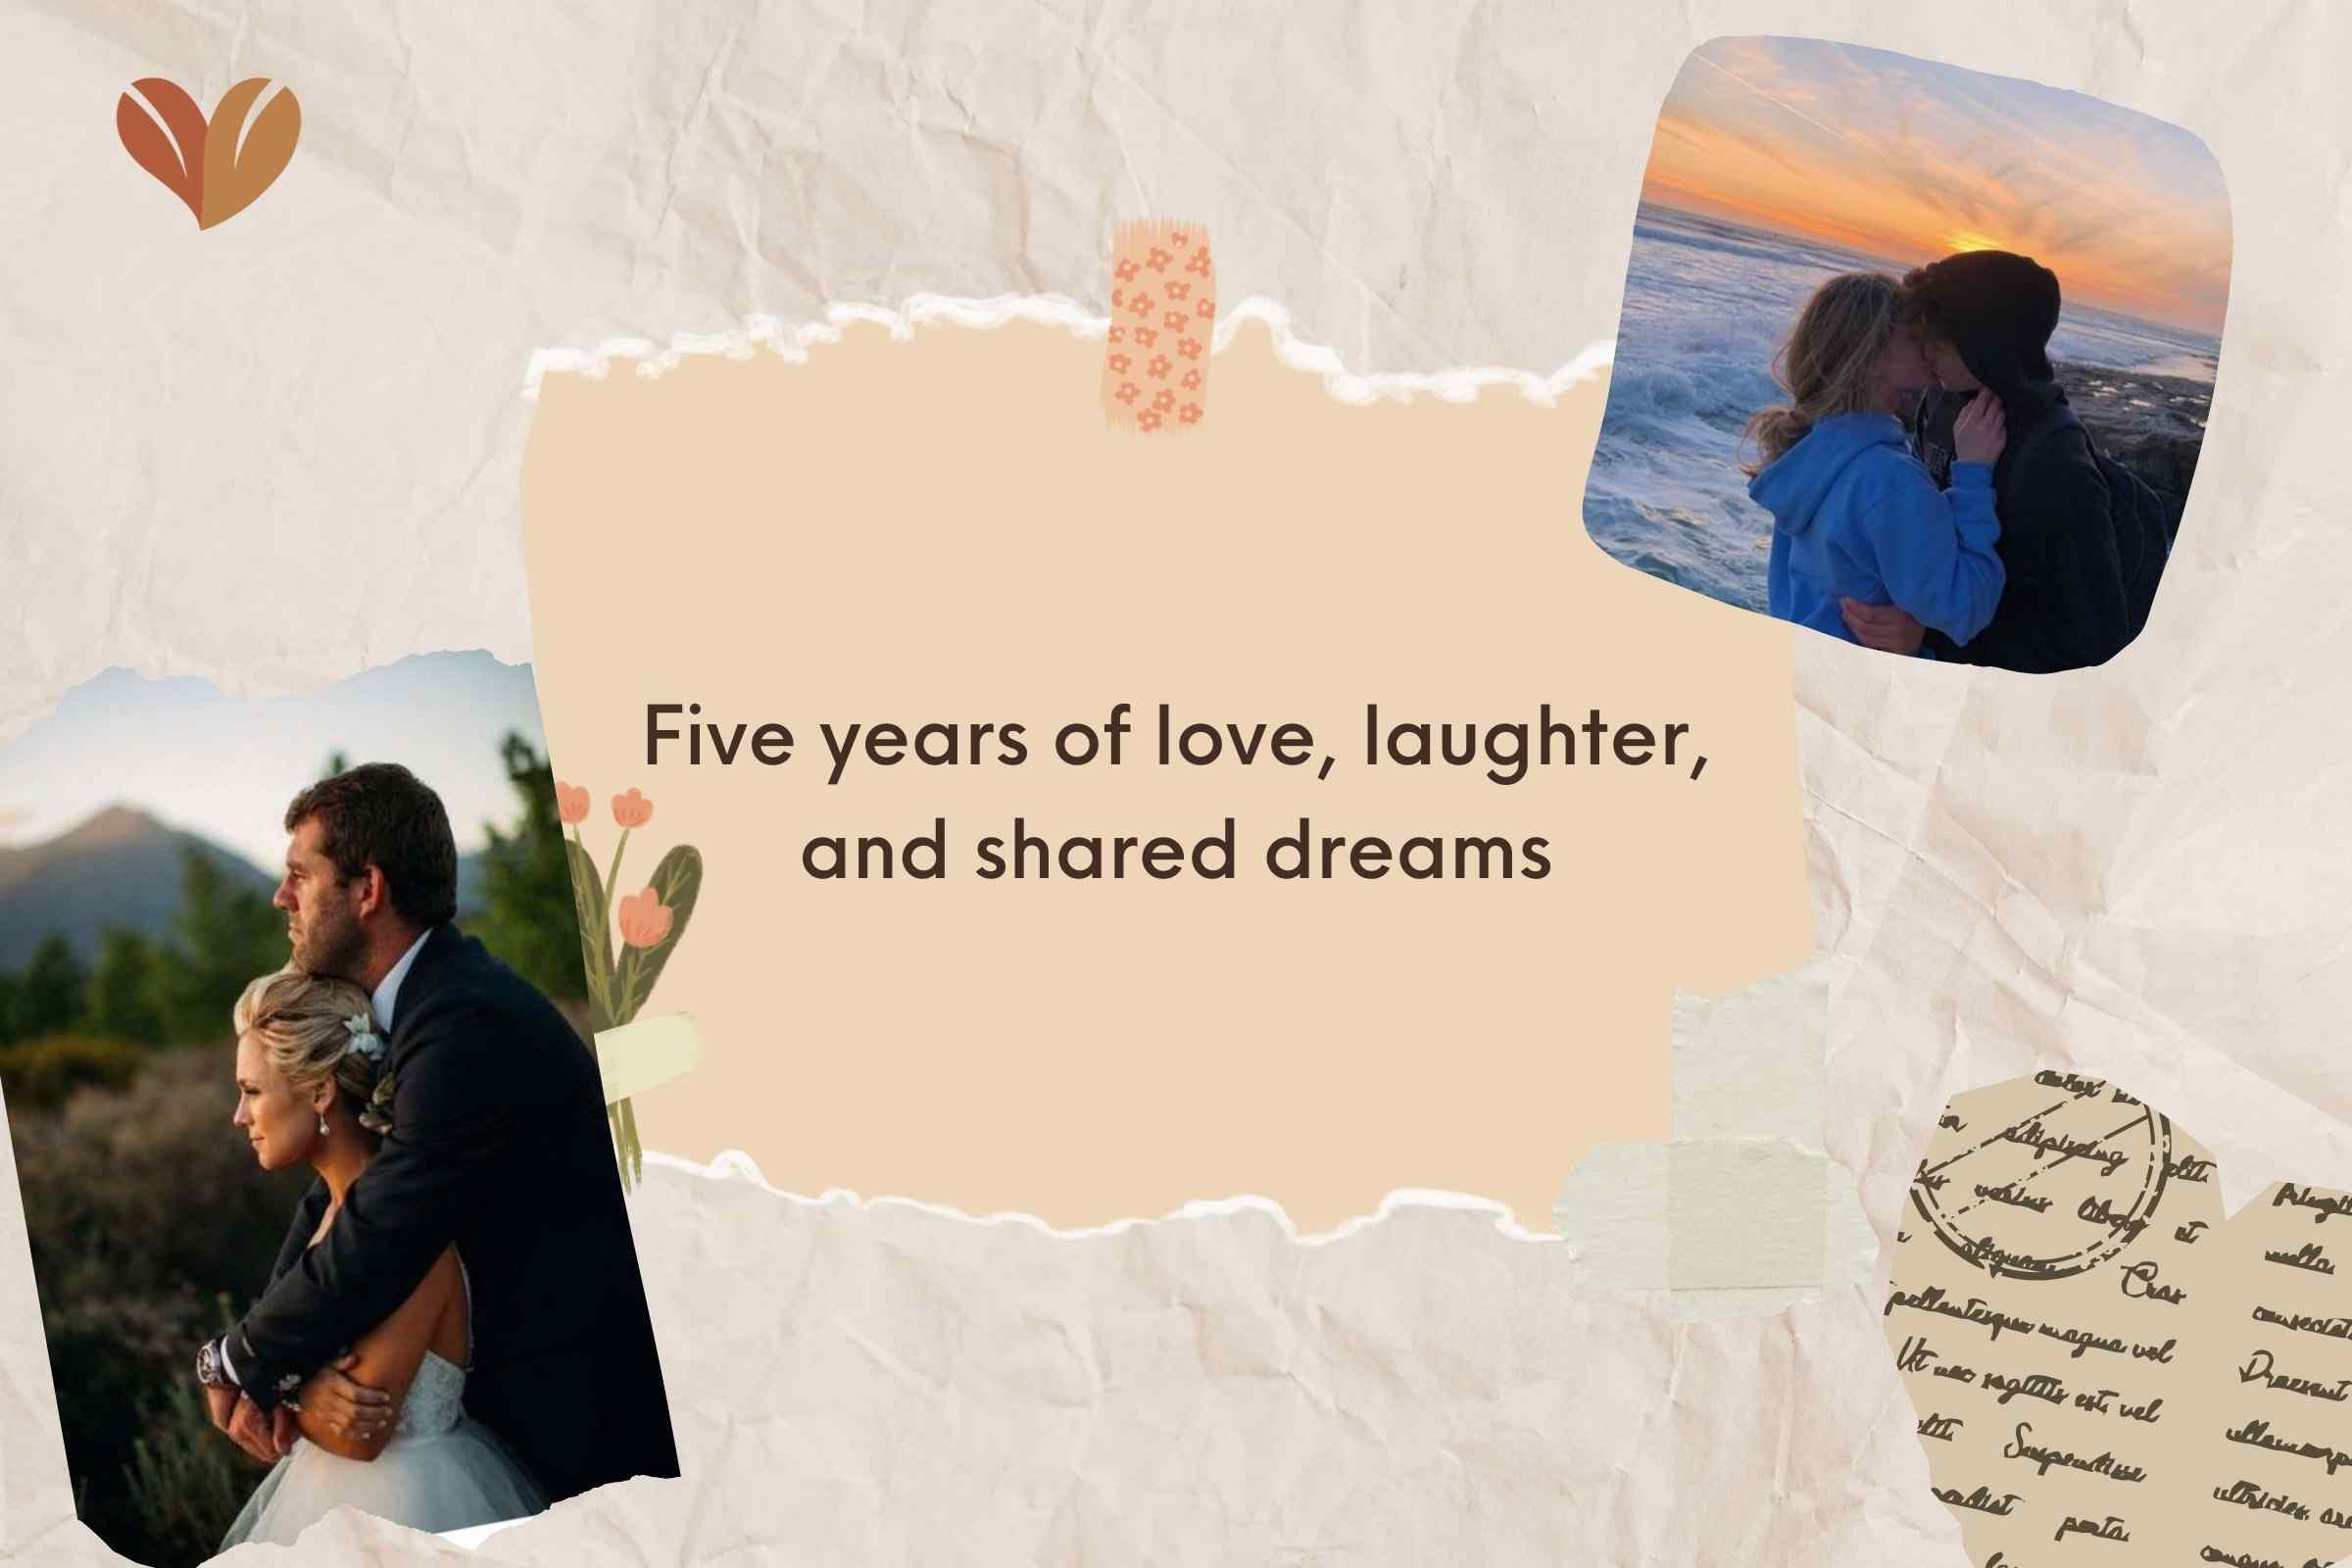 Five years of love, laughter, and shared dreams